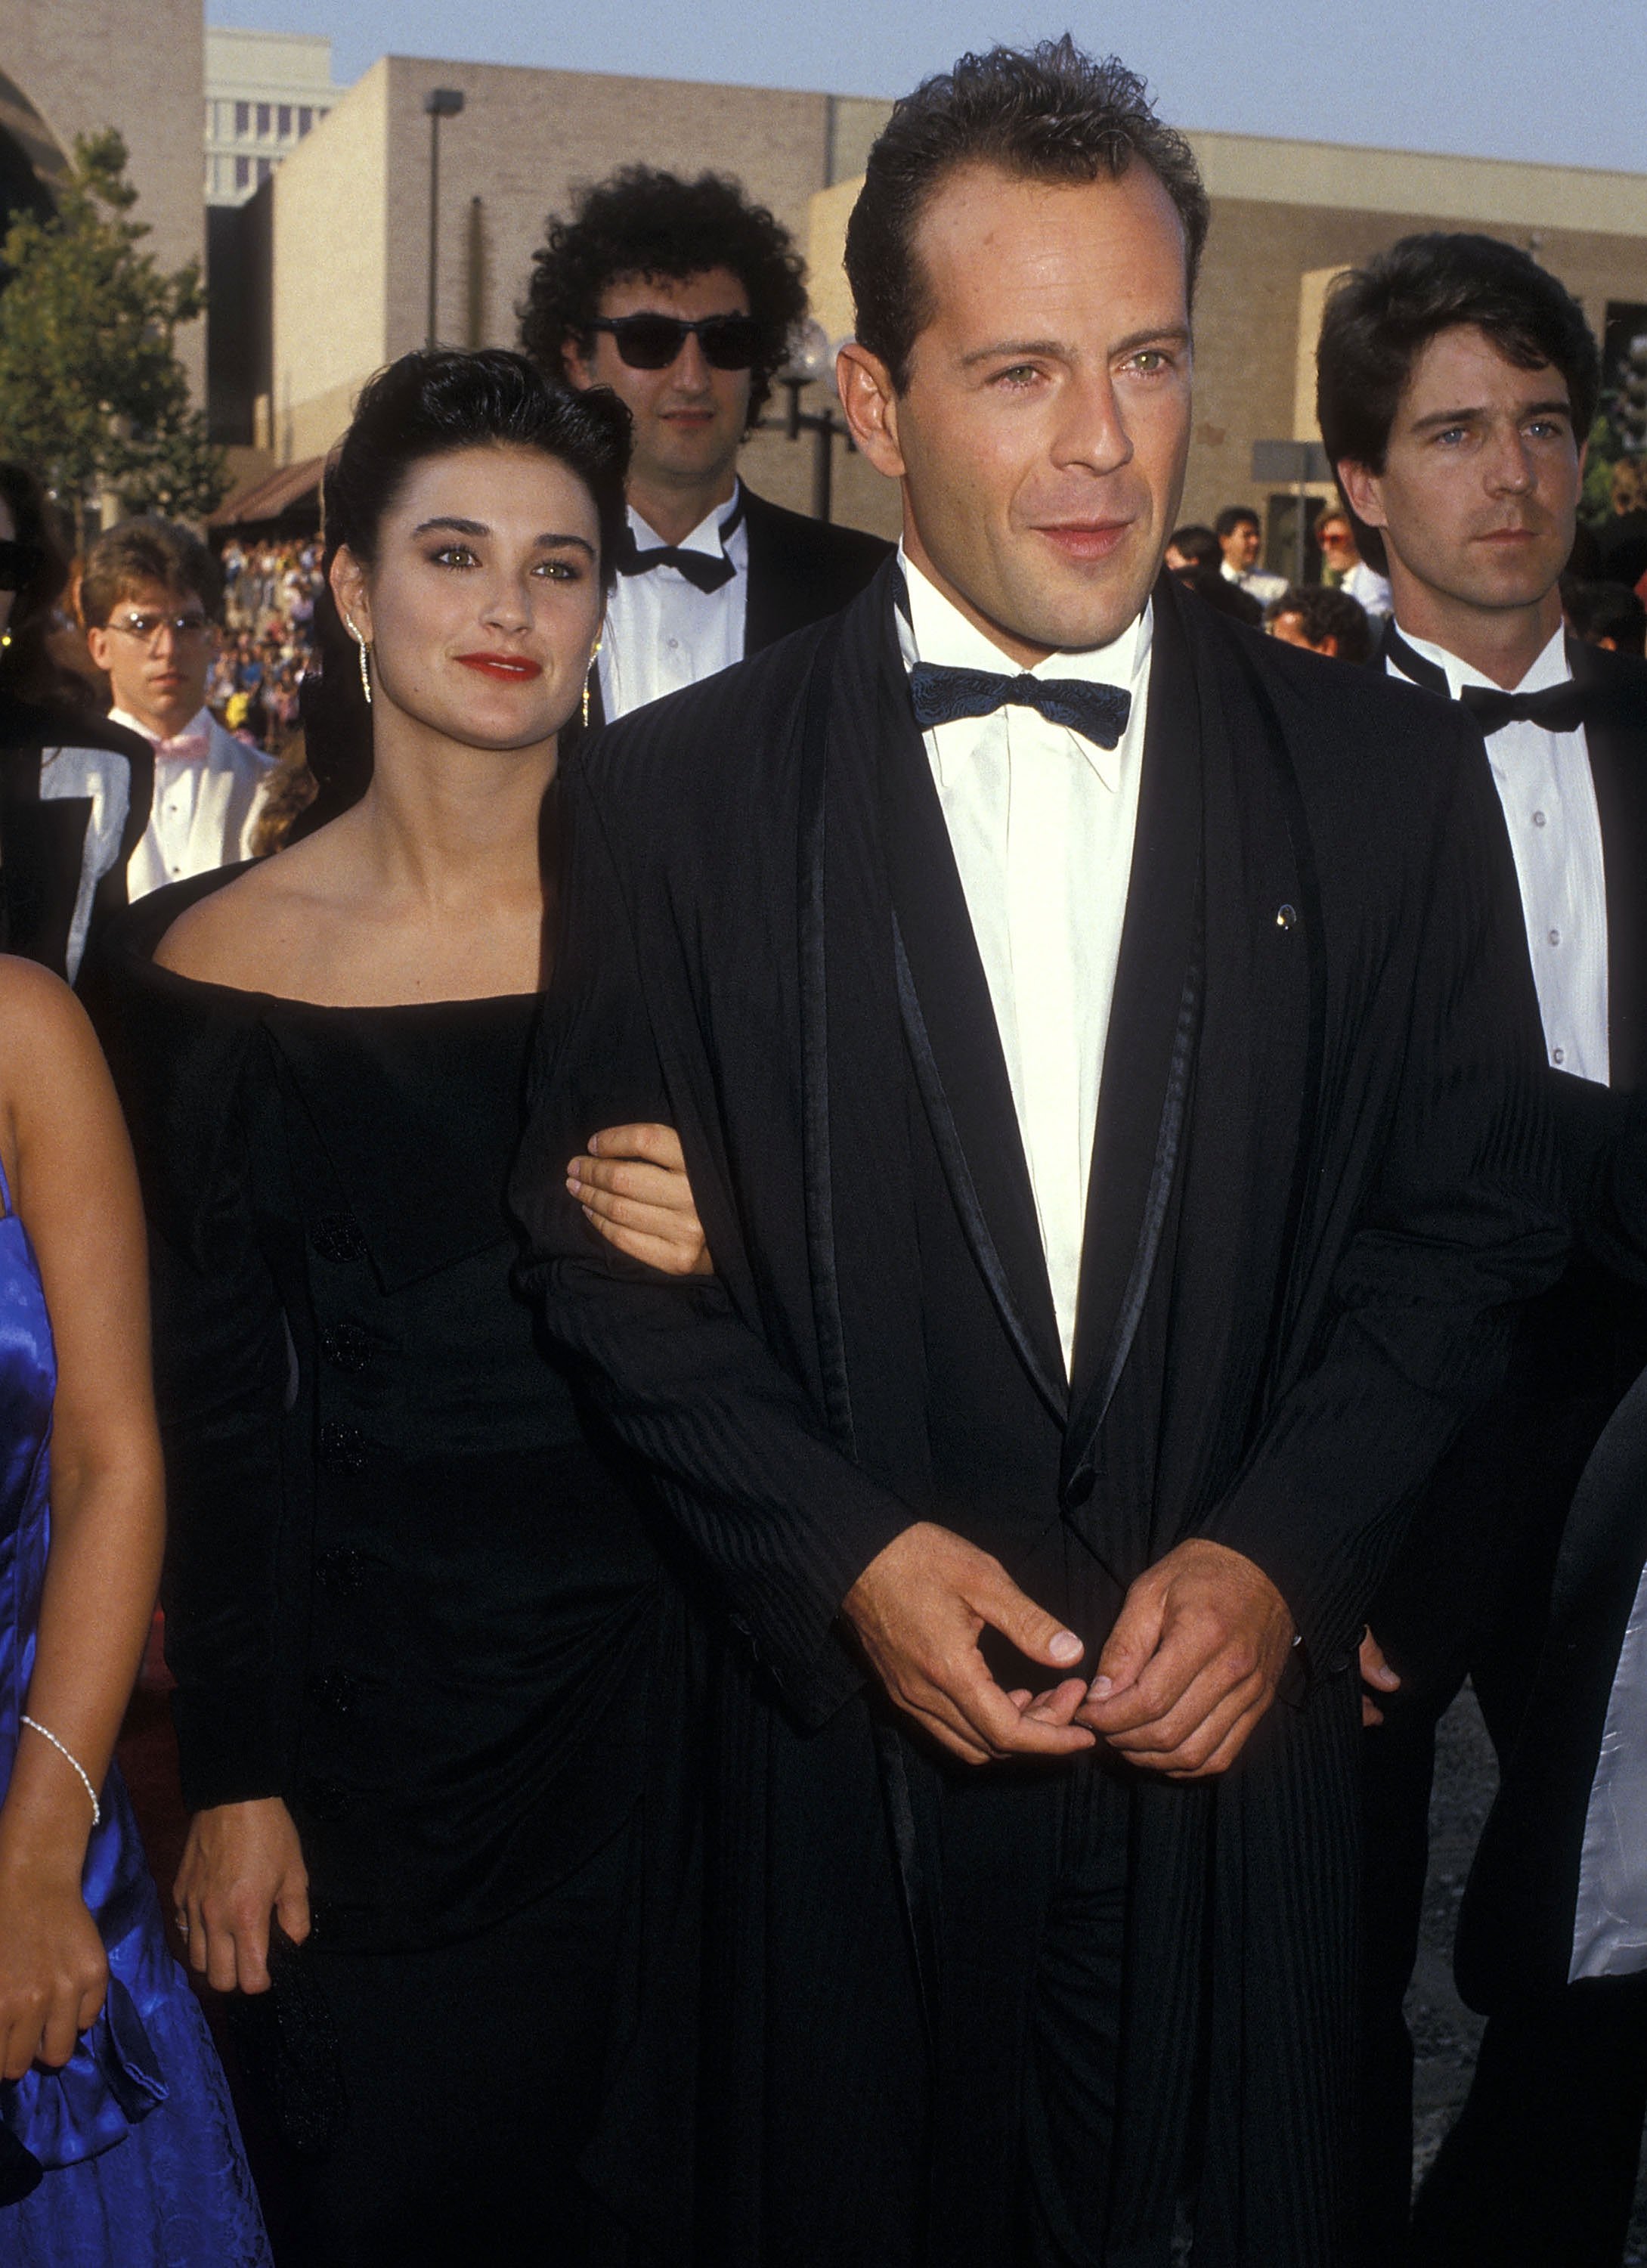 Demi Moore and Bruce Willis at the 39th Annual Primetime Emmy Awards on September 20, 1987, in Pasadena, California. | Source: Getty Images